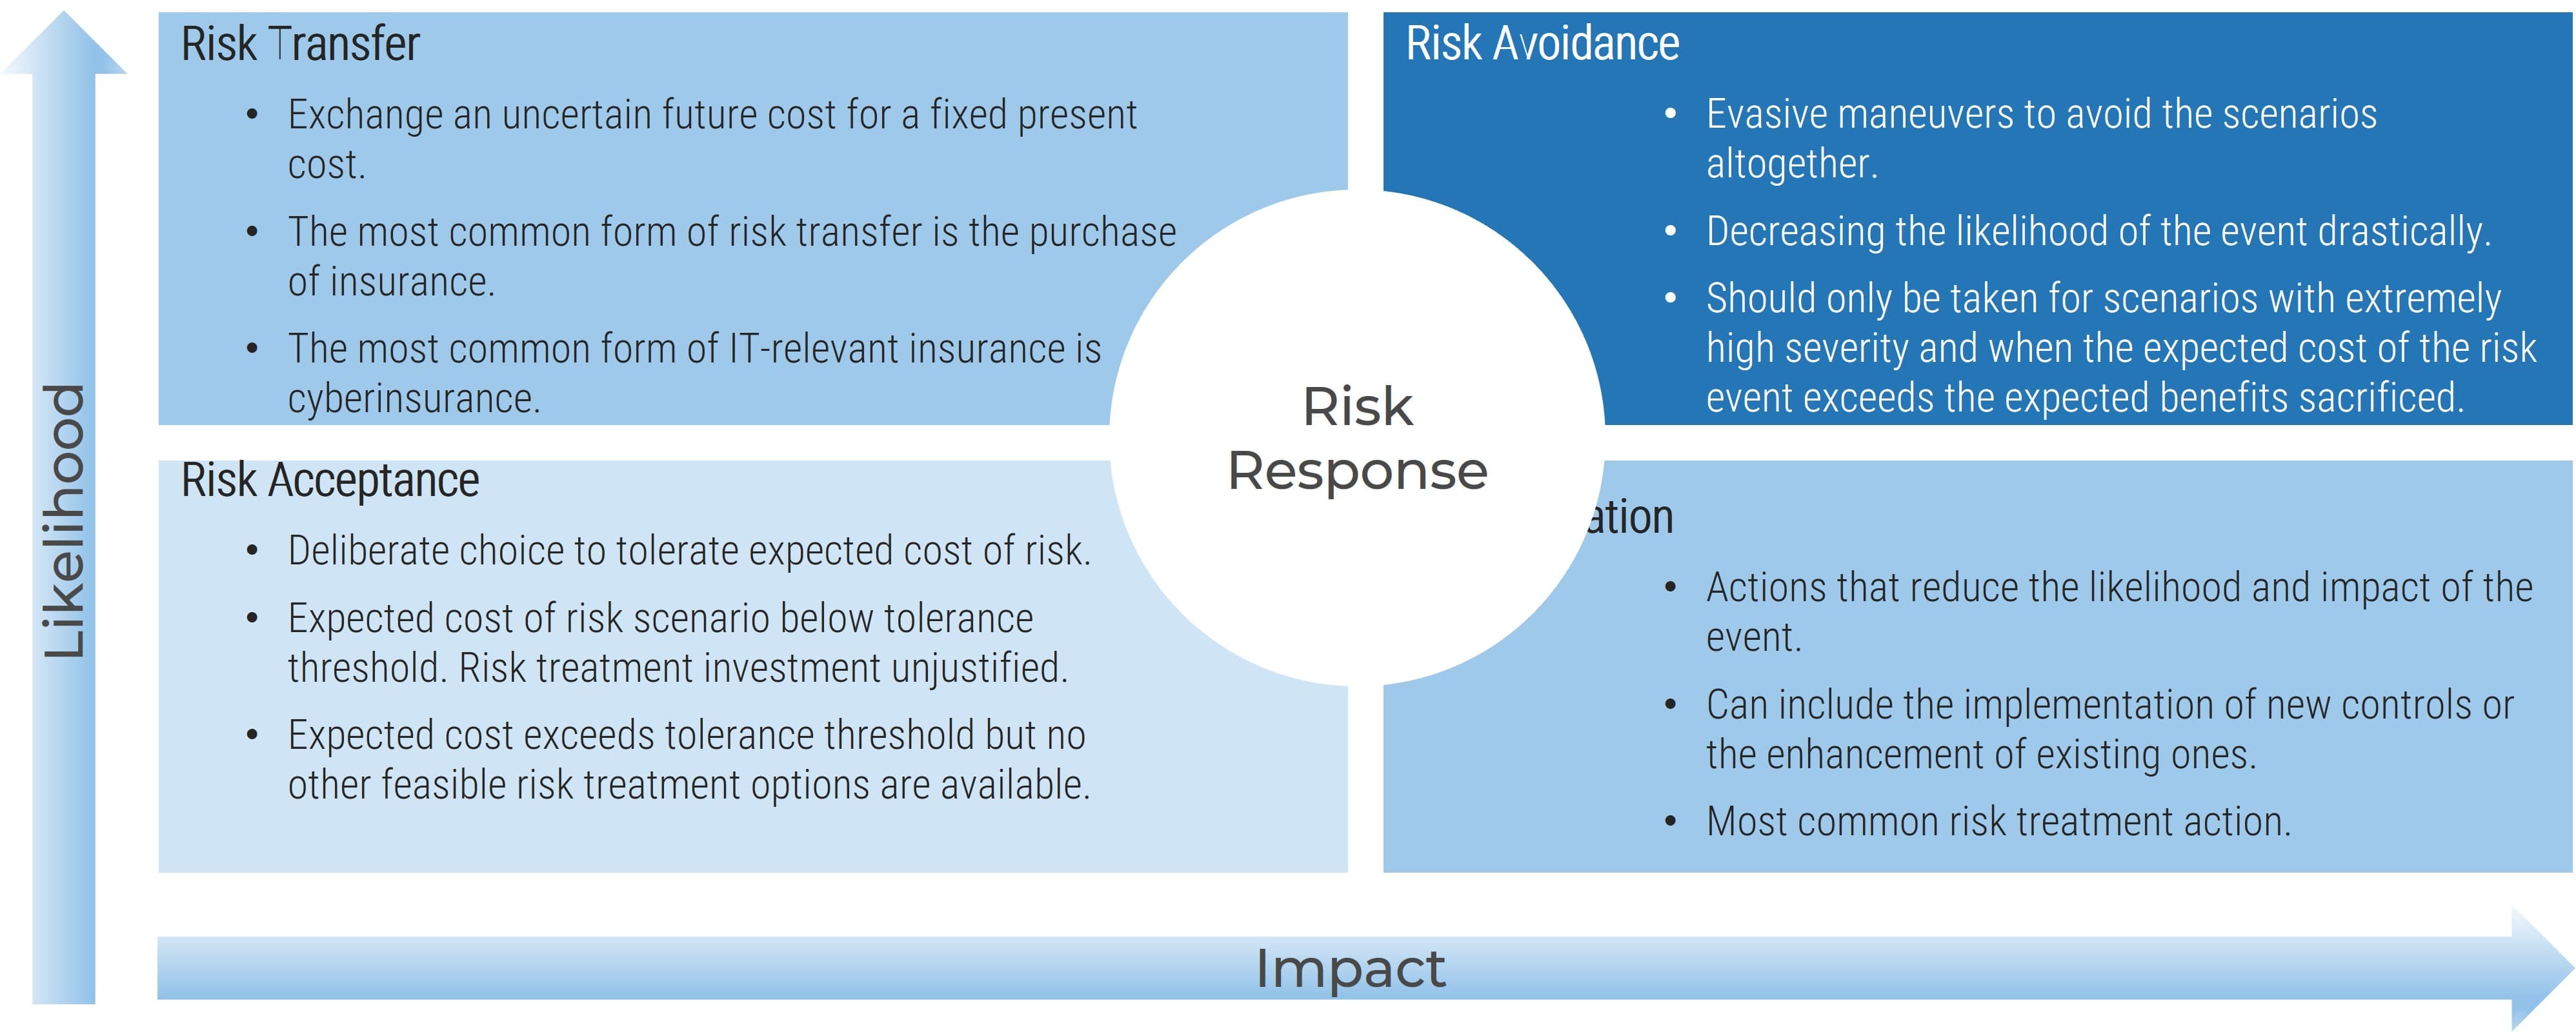 The image contains a diagram of he risk response analysis. Risk Transfer and Risk Avoidance has the most likelihood, and Risk Acceptance and Risk Mitigation have the most impact. Risk Avoidance has the most likelihood and most impact in regards to risk response.